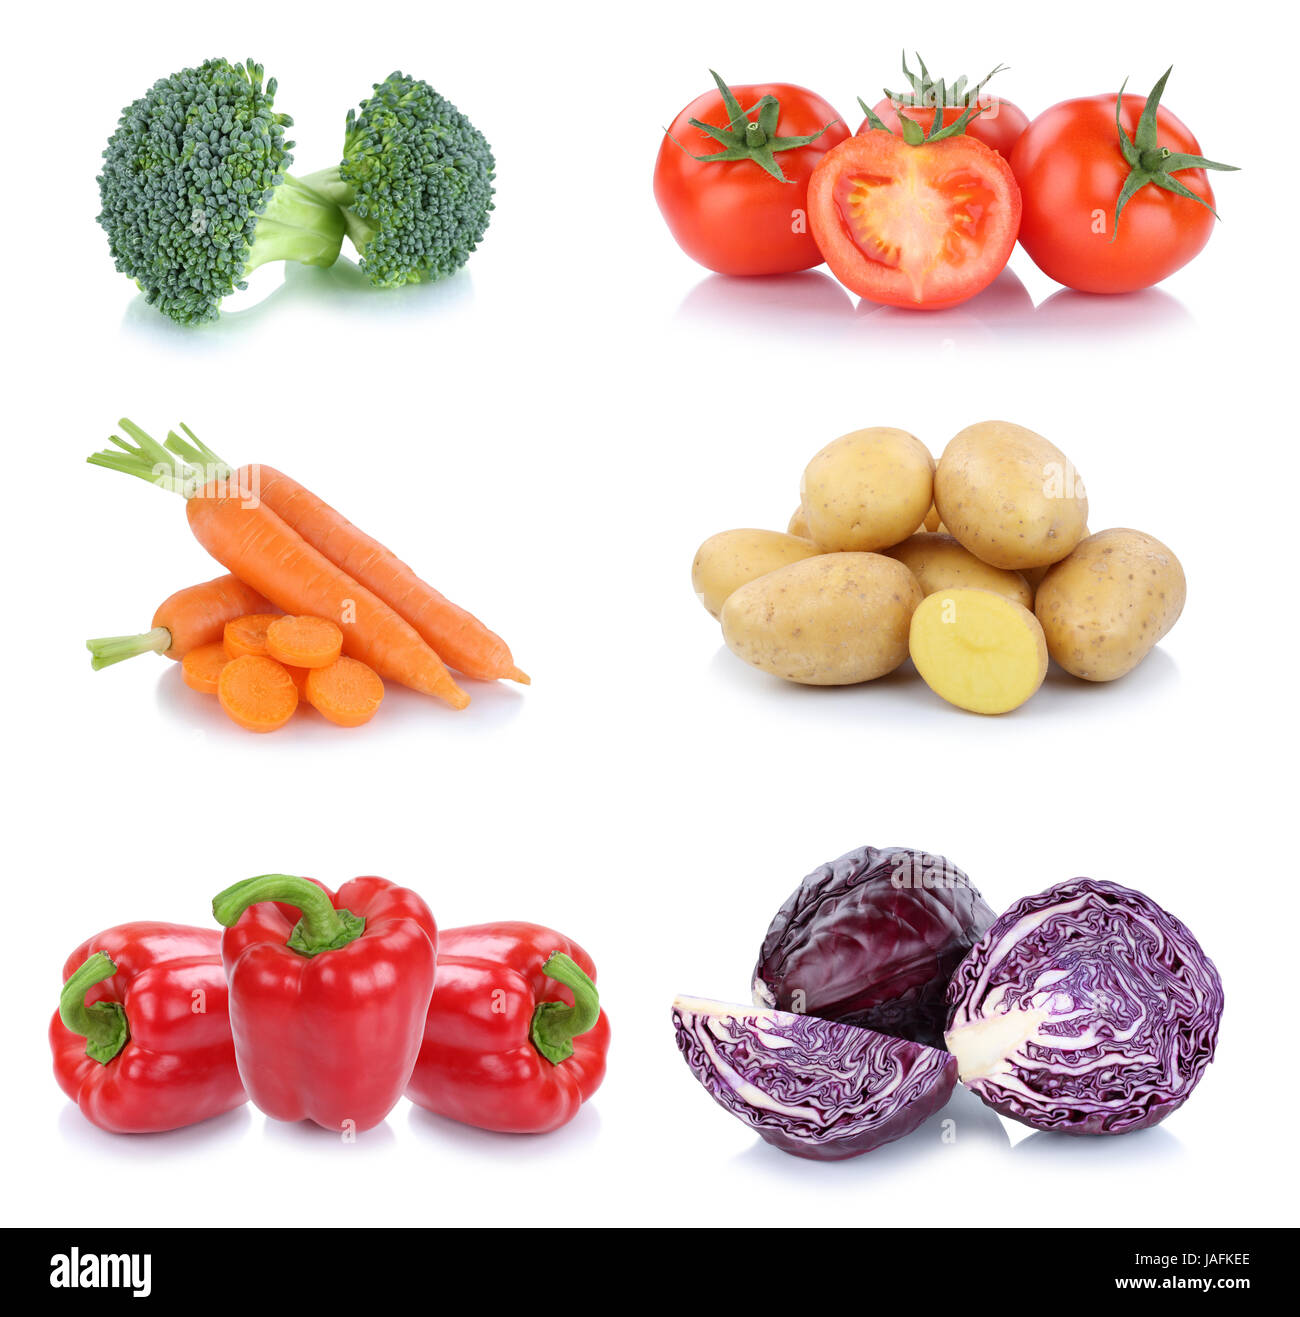 Vegetables carrots tomatoes bell pepper vegetable potatoes food isolated on a white background Stock Photo